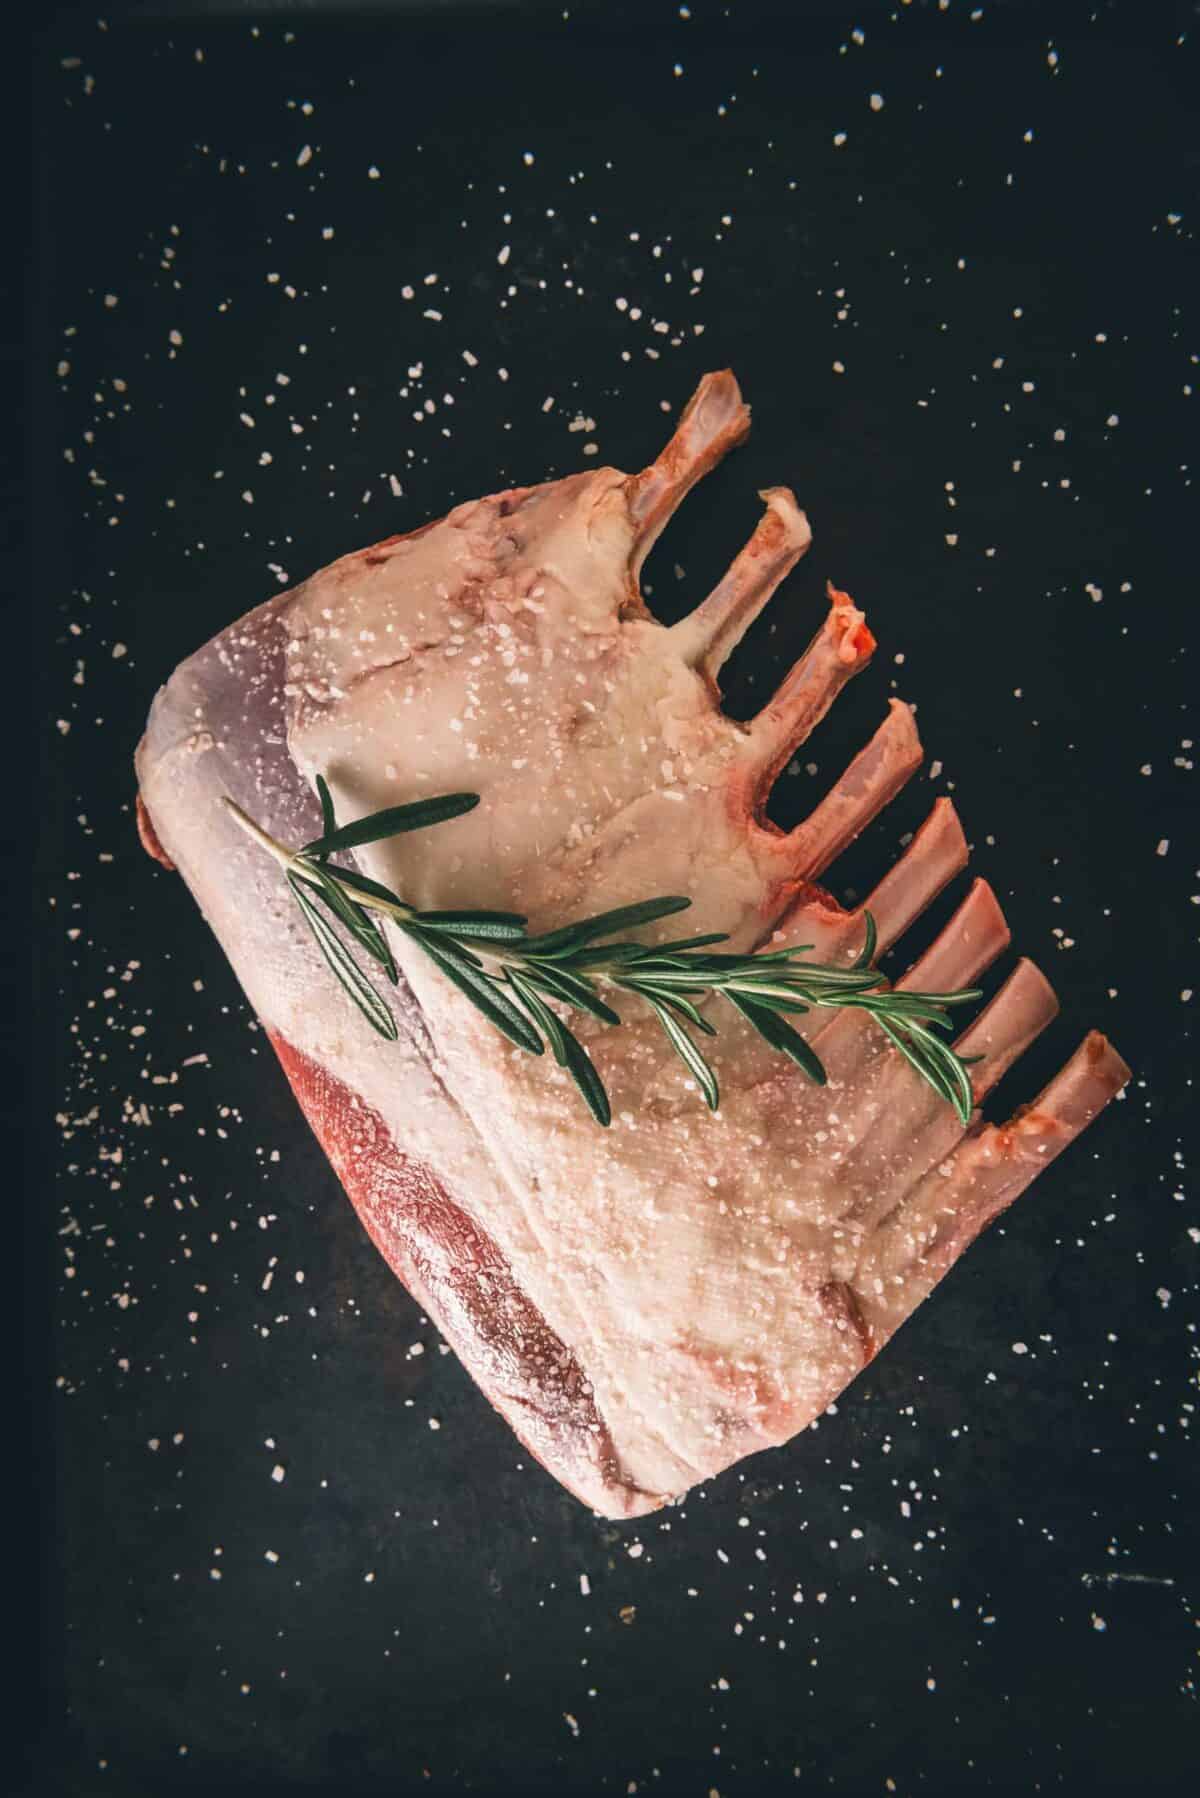 A piece of lamb with a rosemary sprig on a black background.